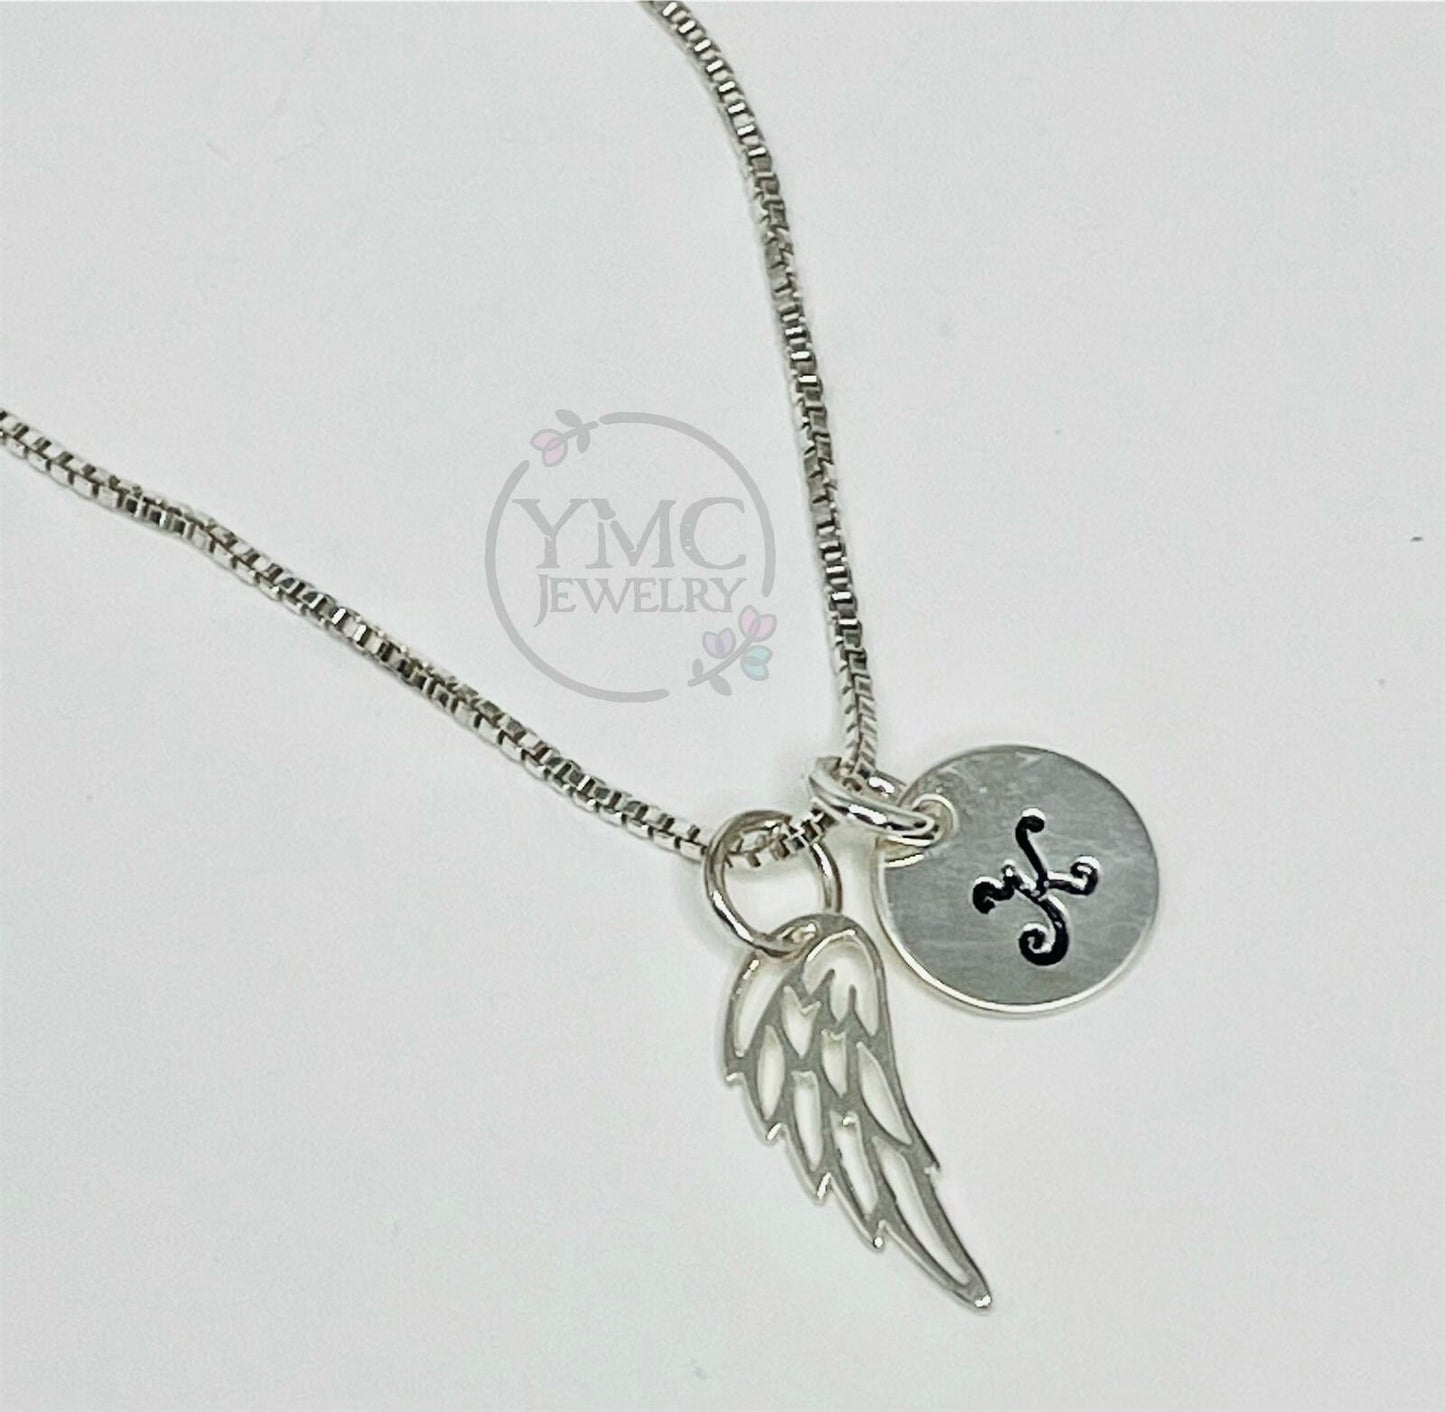 Remembrance Memorial Angel Wing Necklace,Mother's Day Gift,Sympathy Bereavement Gift,Loss of Husband Mom Brother Sister Friend Grandmother